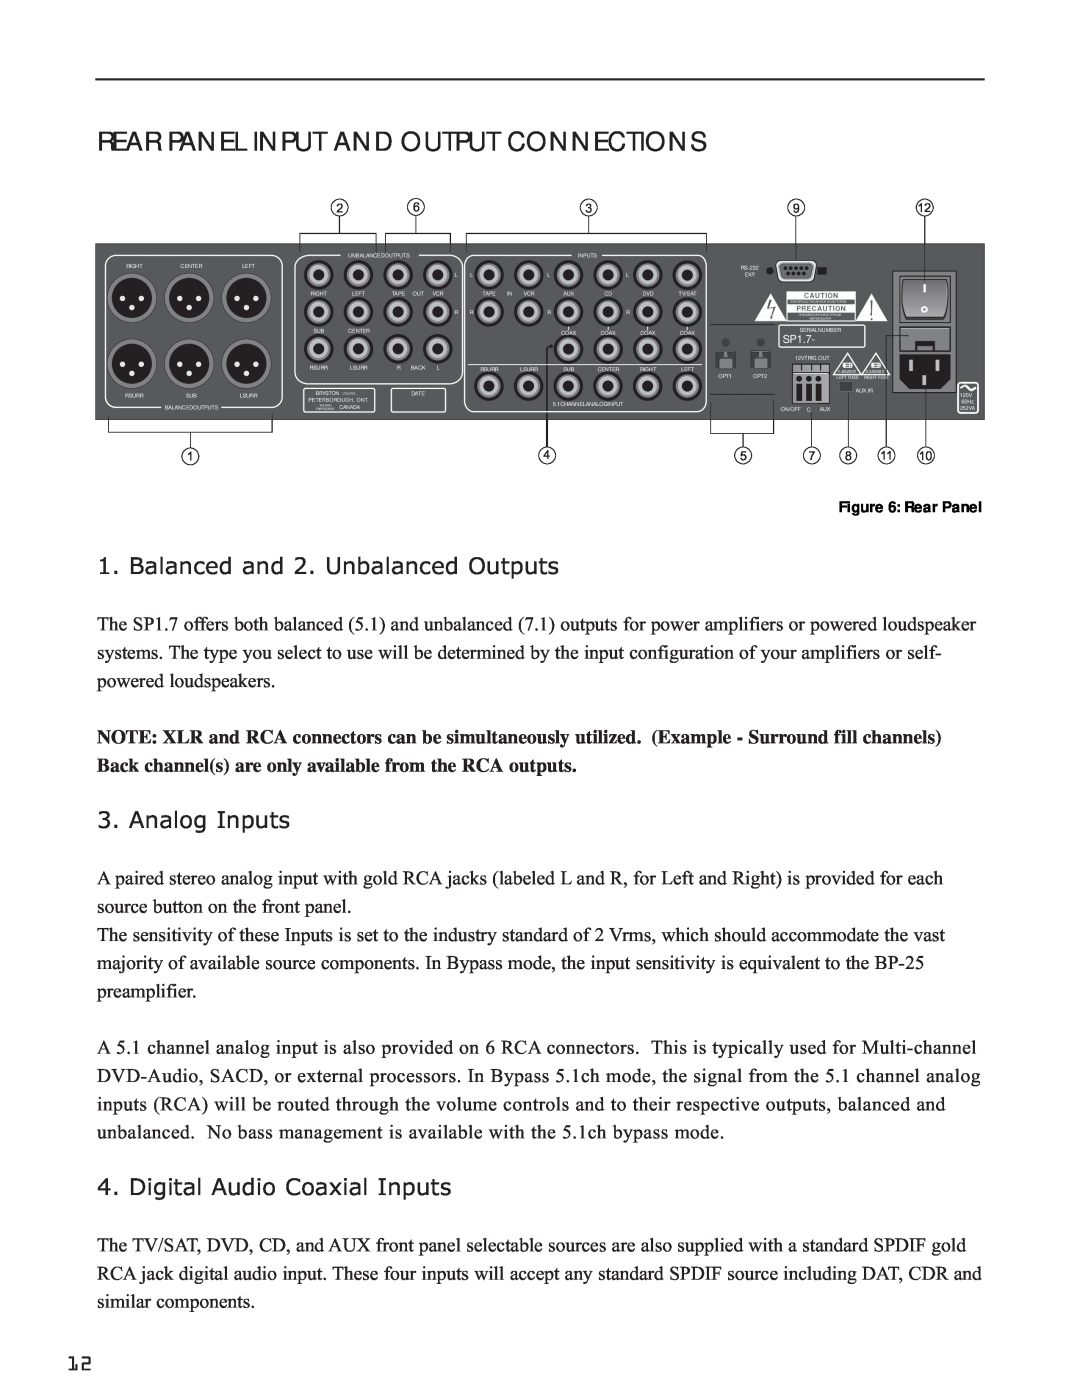 Bryston SP1.7 manual Rear Panel Input And Output Connections, Balanced and 2. Unbalanced Outputs, Analog Inputs 